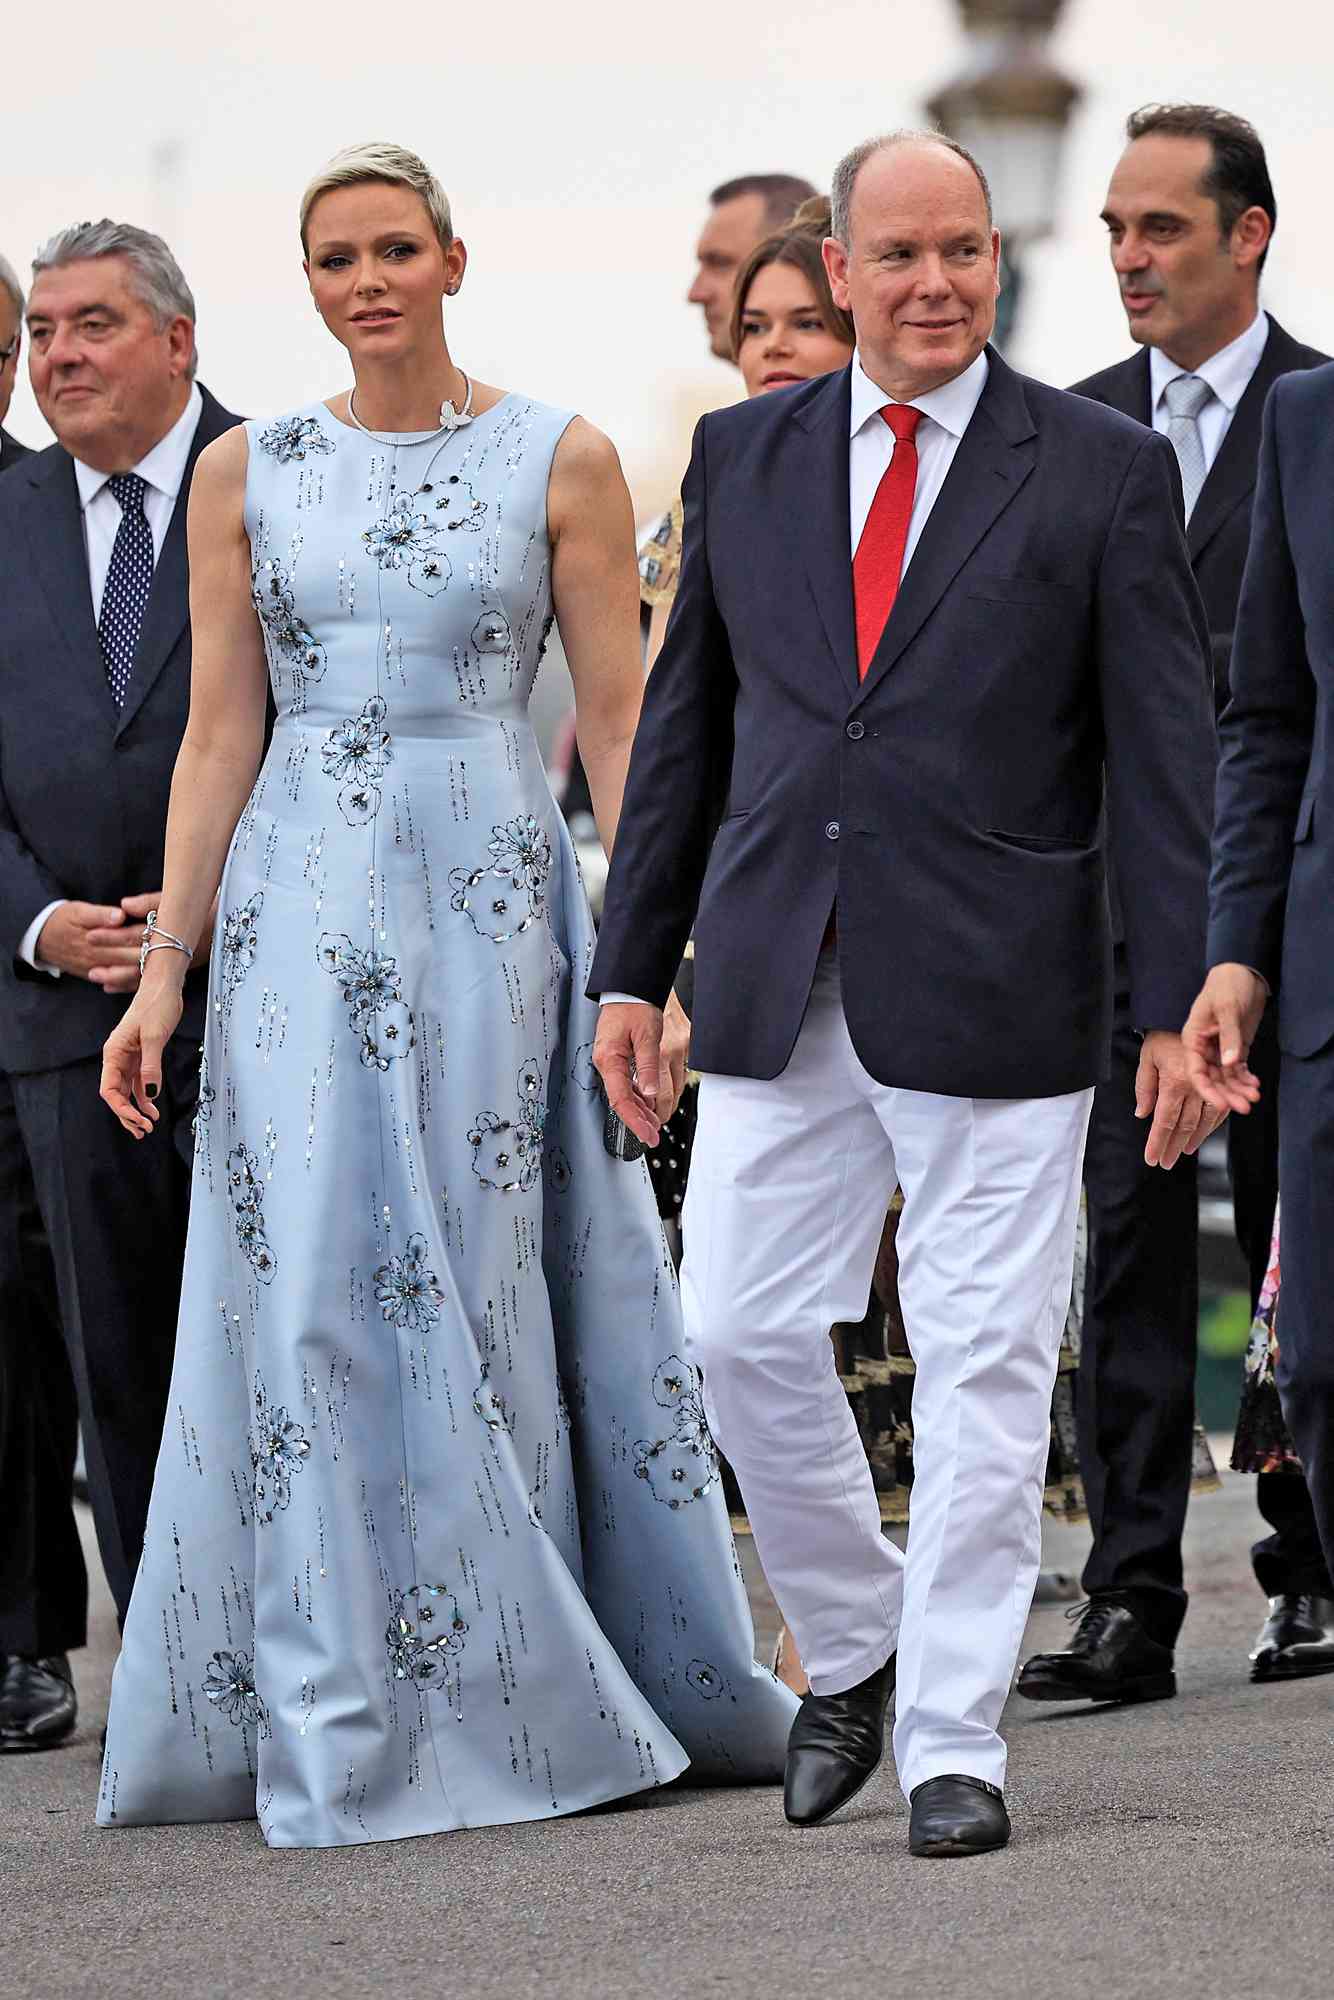 Prince Albert II of Monaco and Princess Charlene of Monaco arrive for the 73rd edition of the Red Cross Gala at the Casino in Monte Carlo on July 18, 2022.